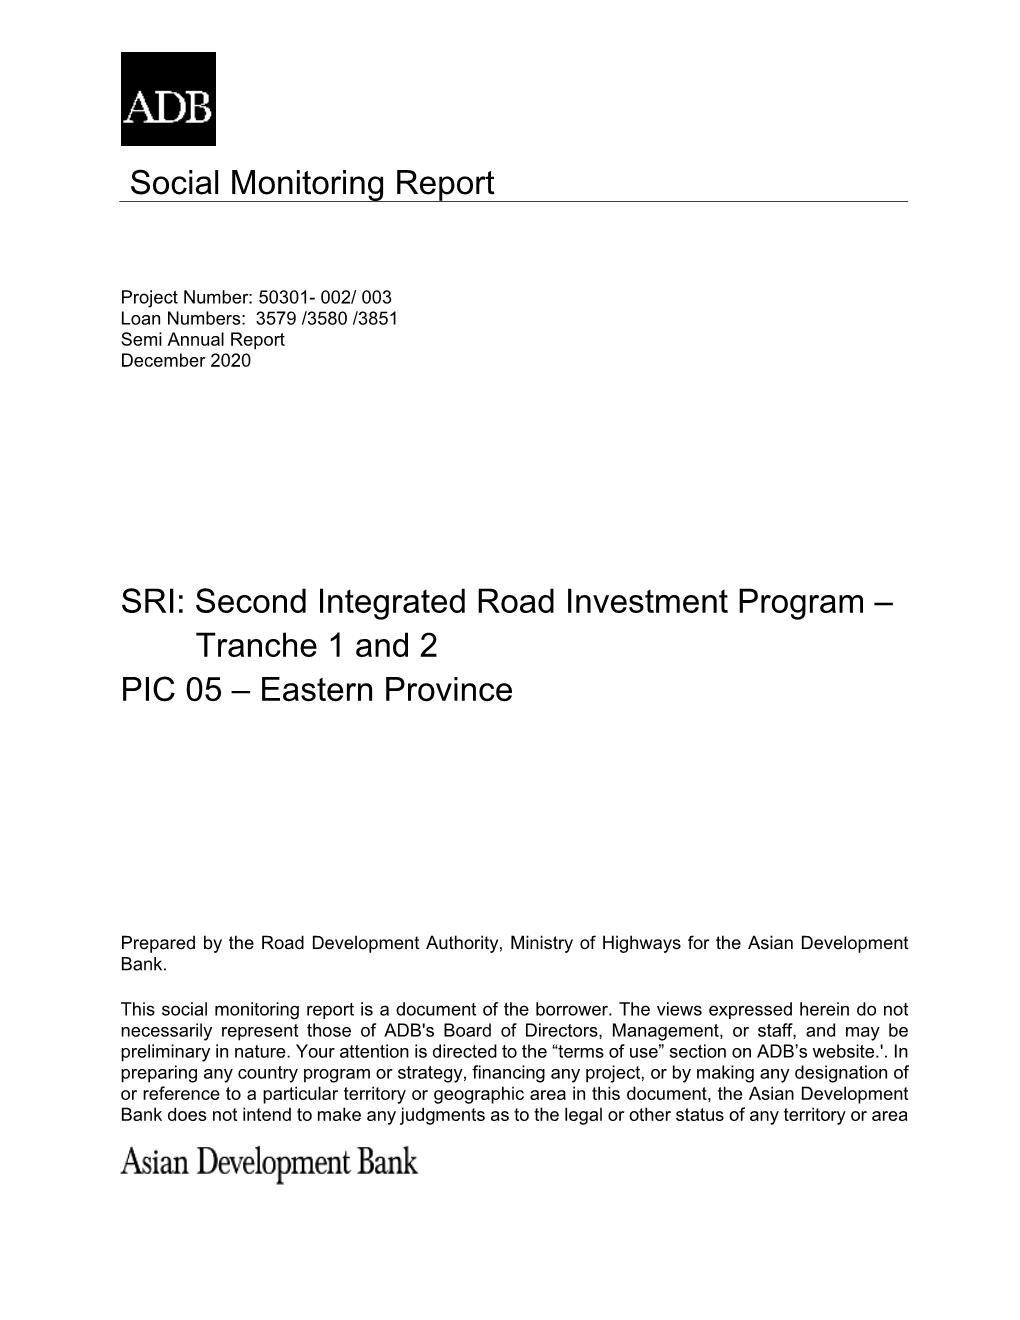 Second Integrated Road Investment Program –